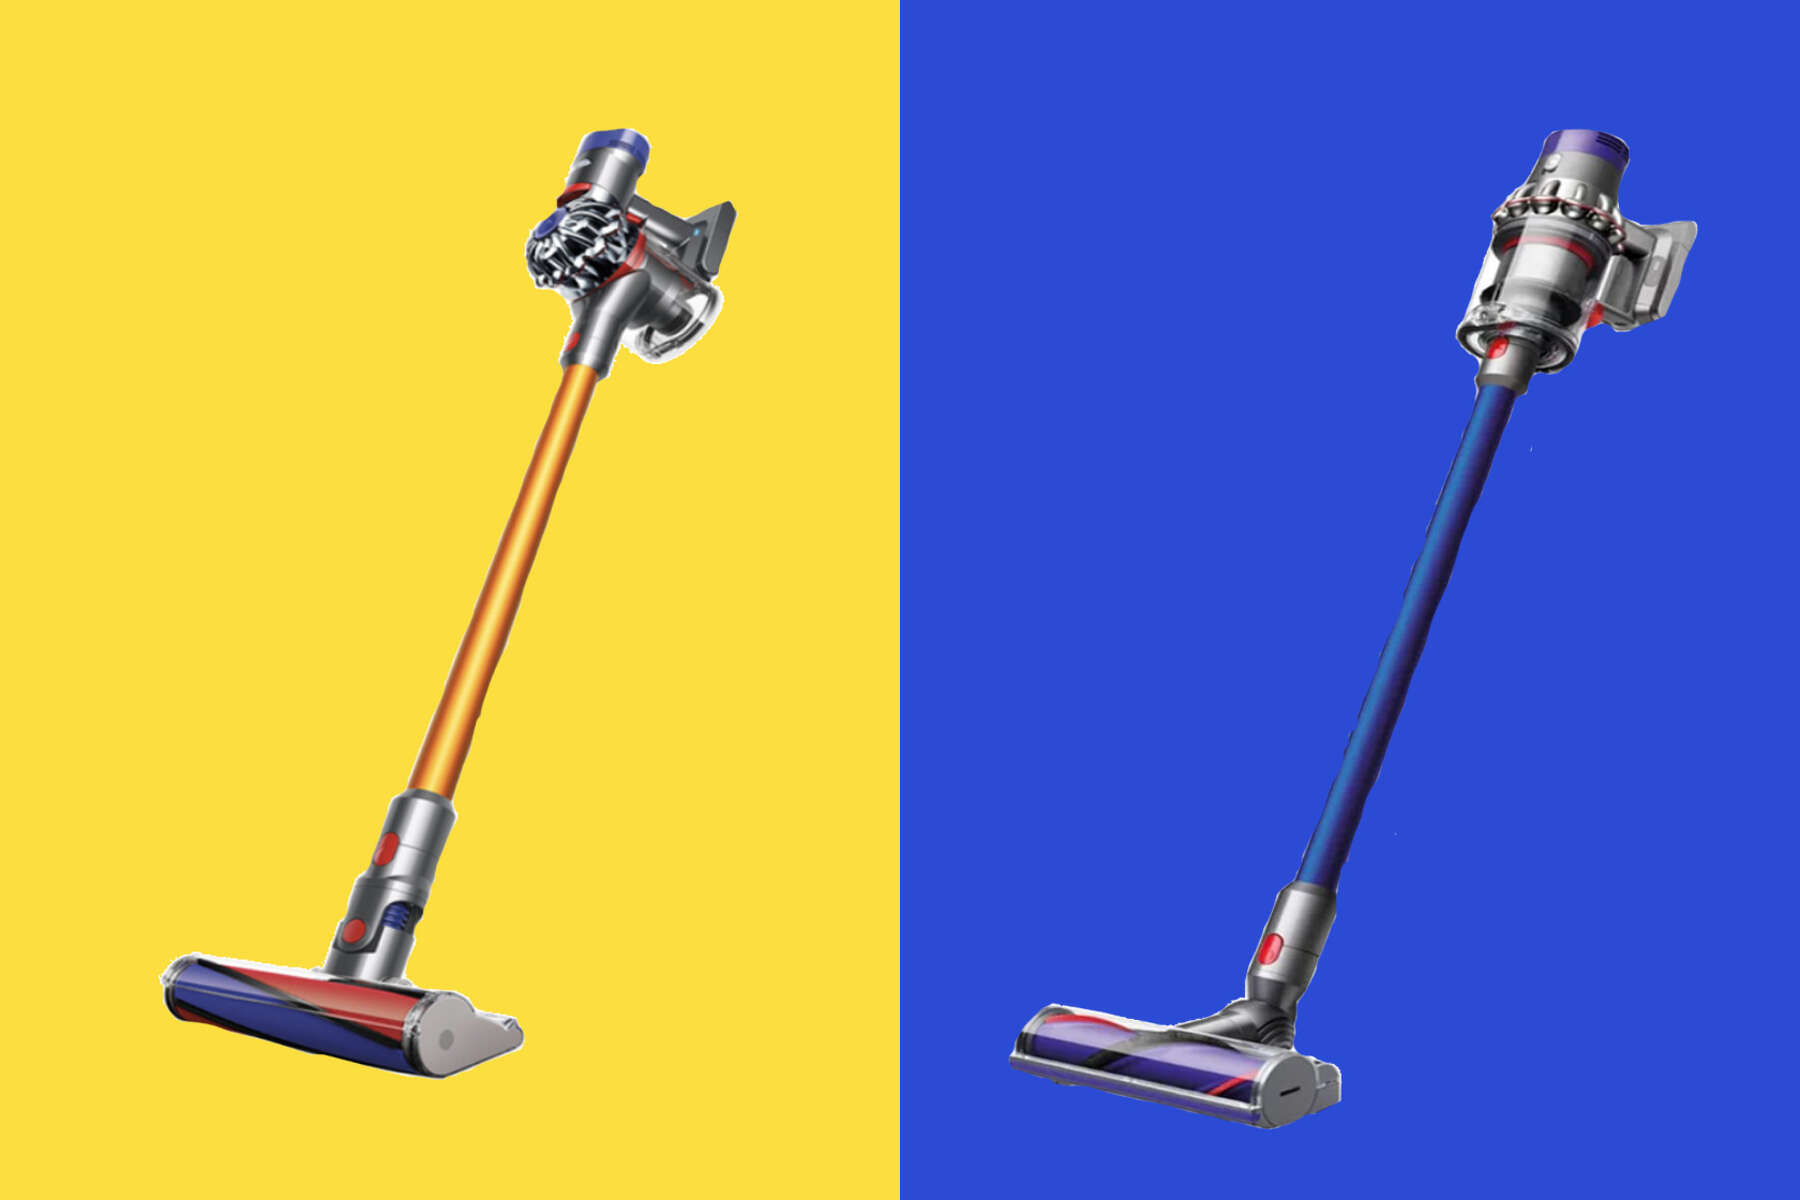 Dyson V8 Vs. V10: The Difference Between The Two Cordless Vacuums